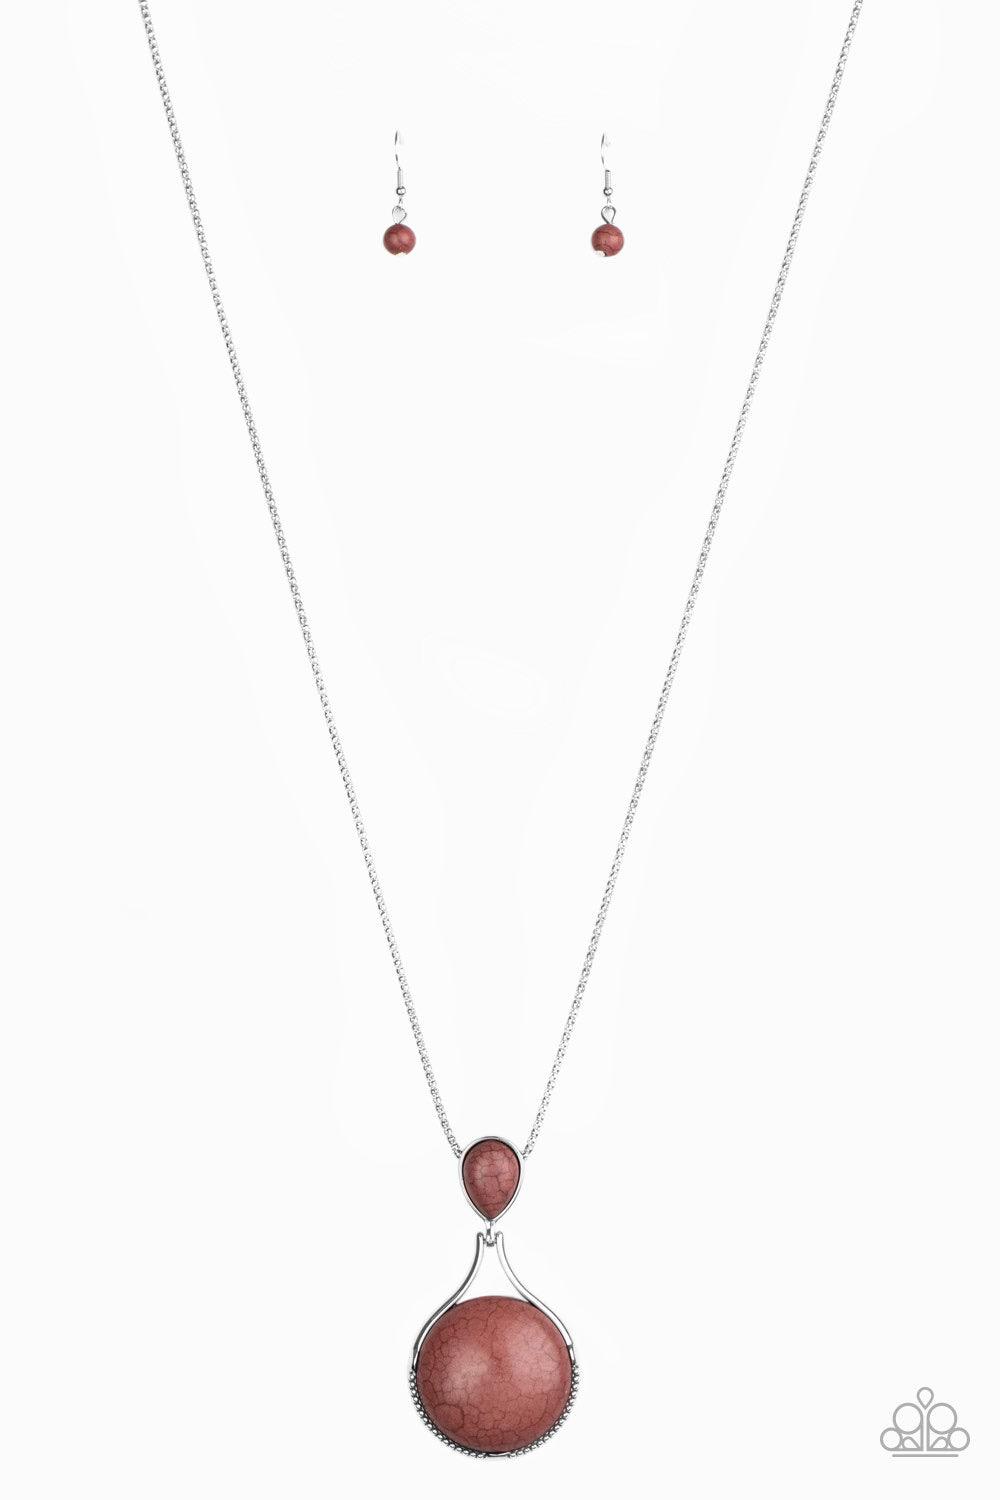 Paparazzi Accessories Desert Pools - Brown Encased in silver, a brown teardrop stone hinges to a large round brown stone at the bottom of a lengthened silver popcorn chain, creating a one-of-a-kind pendant. Features an adjustable clasp closure. Jewelry